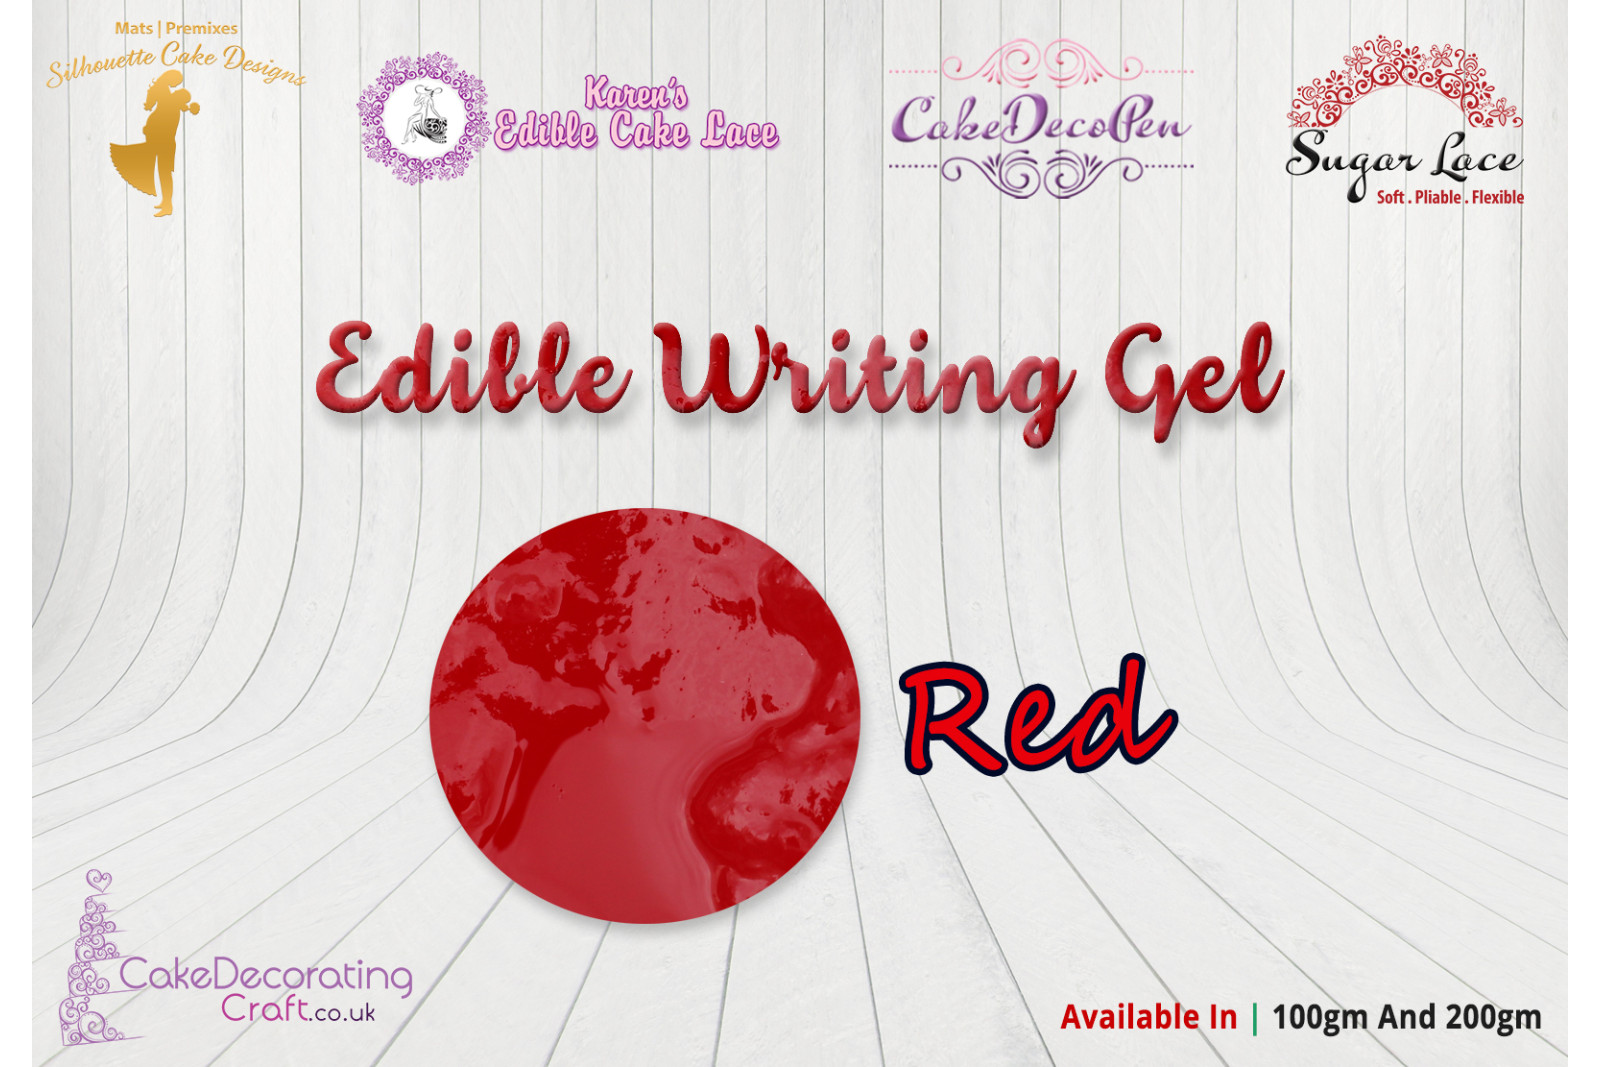 Cake Decorating Craft | Piping And Writing Gel | Edible | Red With Silver Sparkle